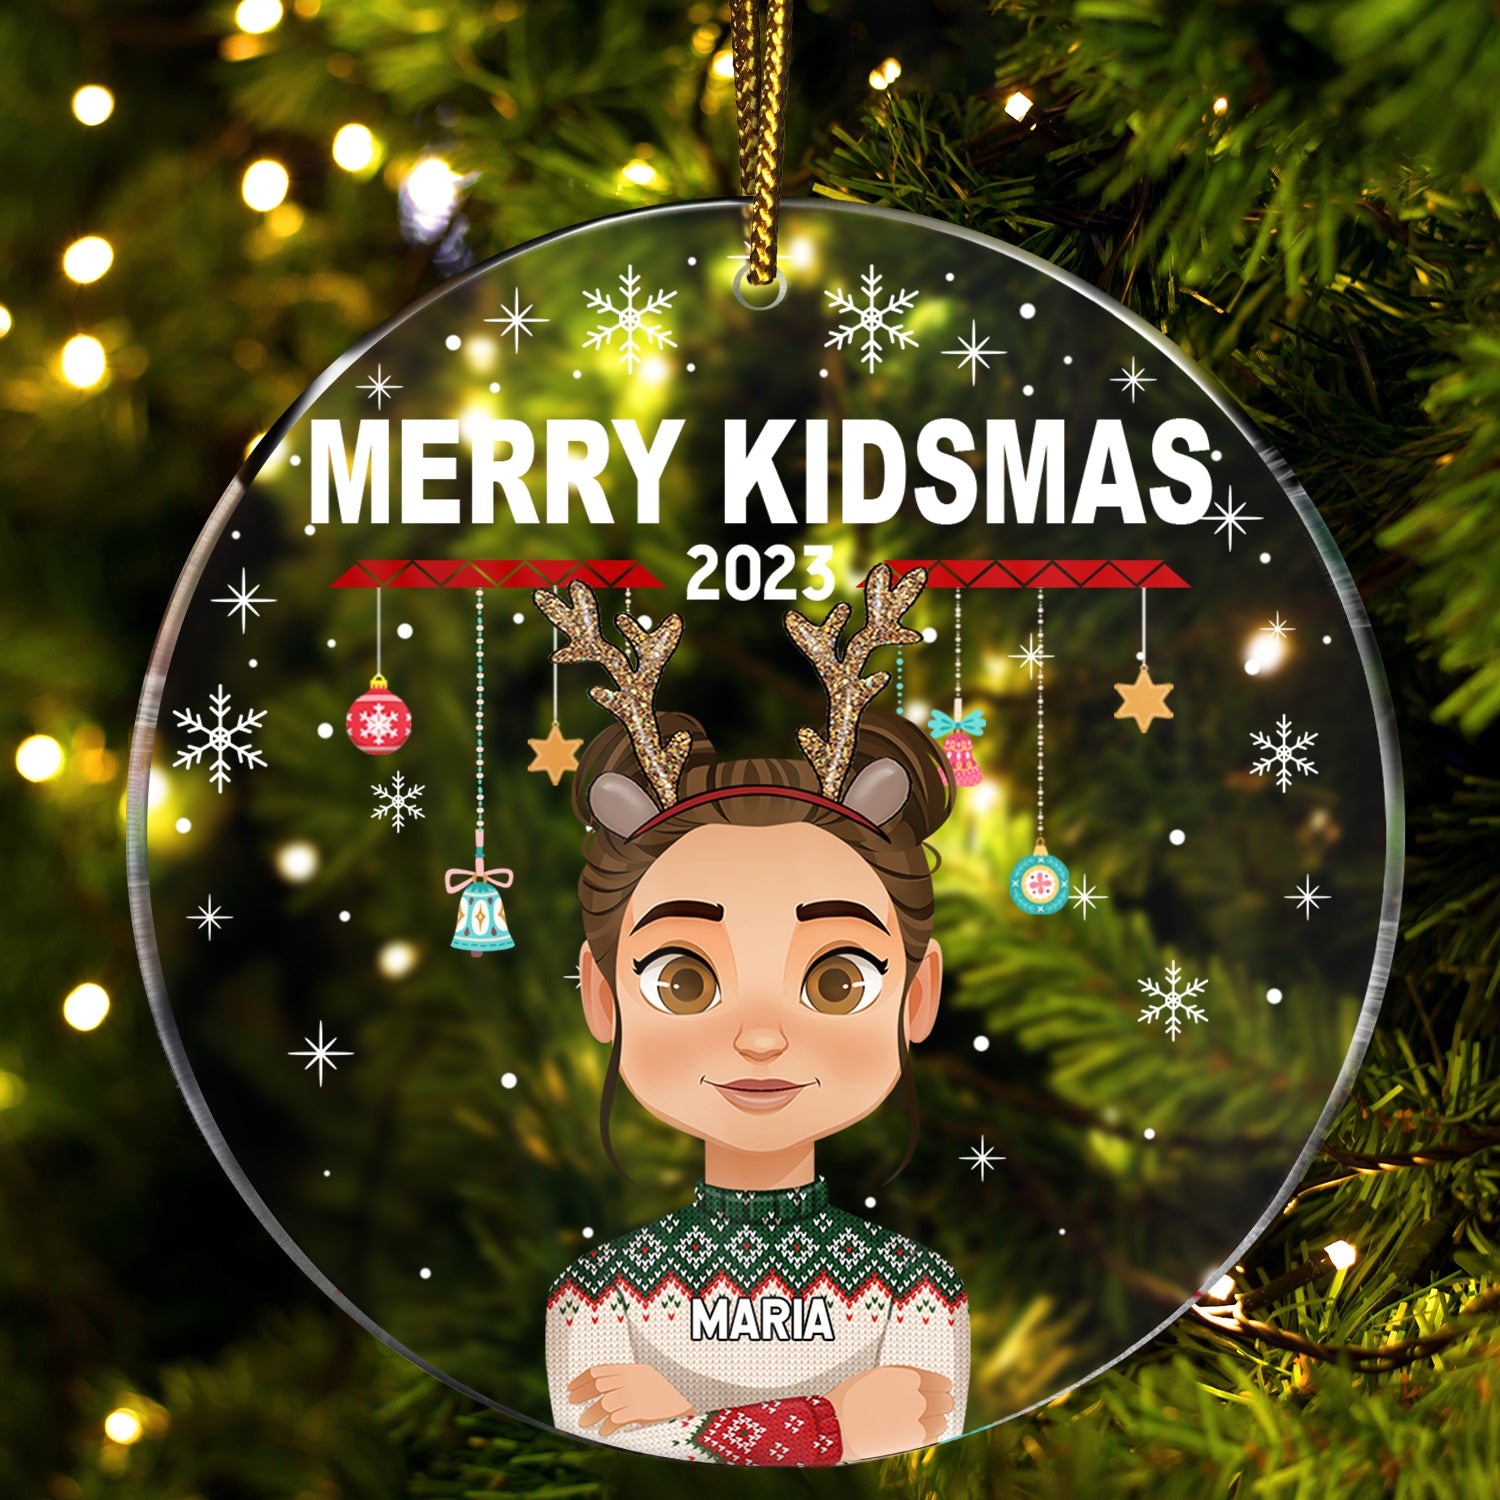 Merry Kidsmas - Christmas Gift For Kids - Personalized Circle Acrylic Ornament